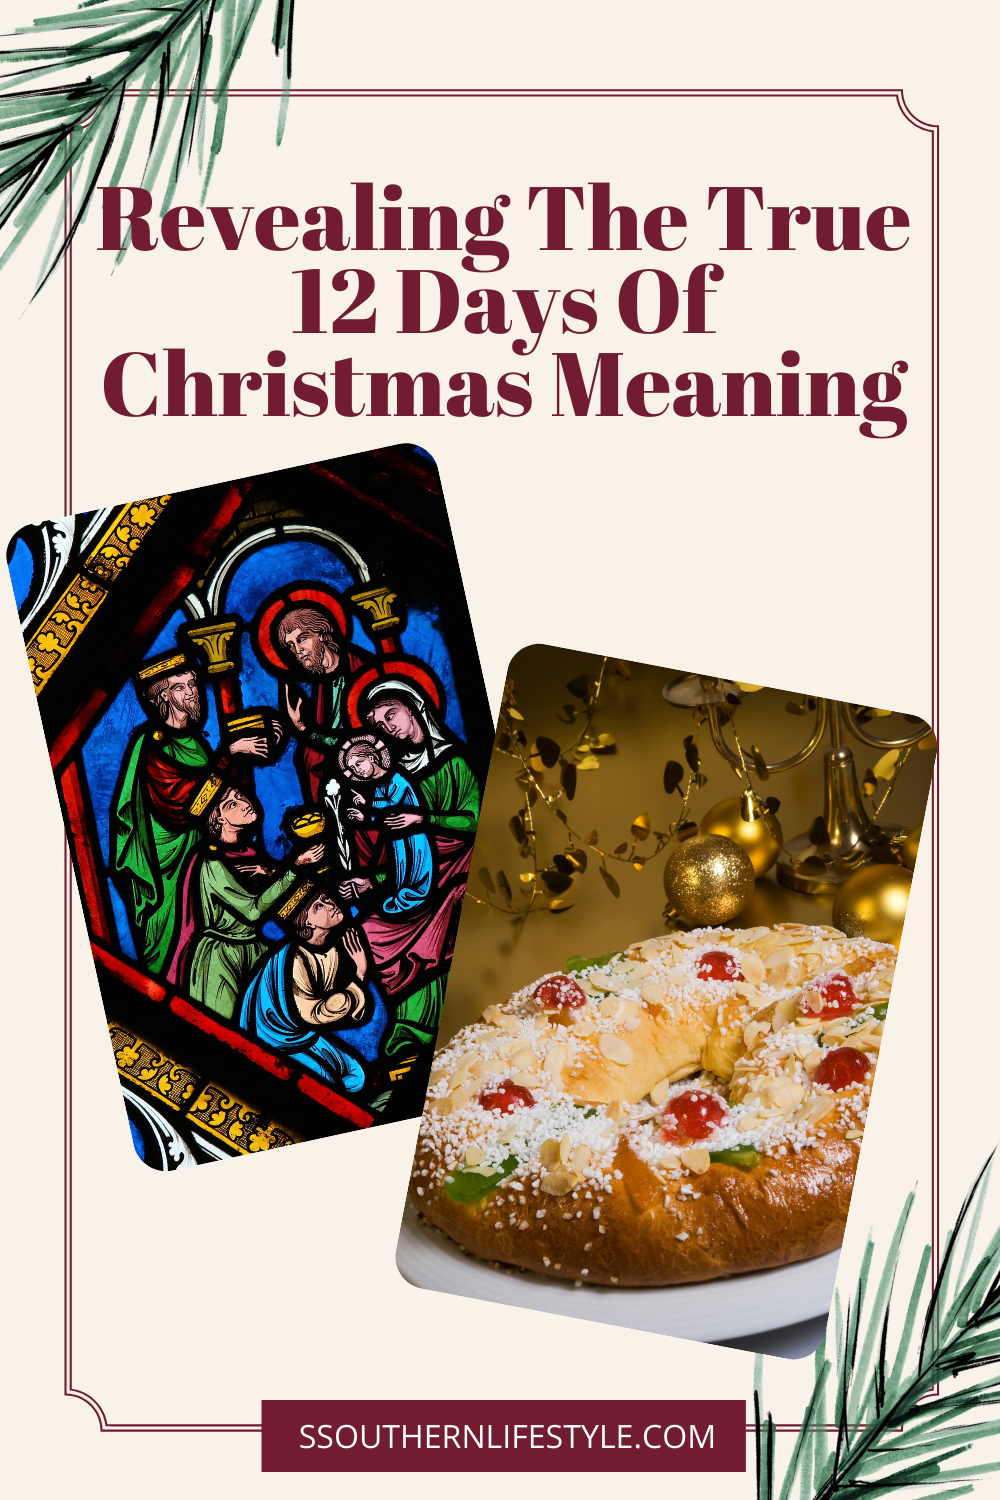 History of Twelve Days of Christmas Epiphany holiday feasting of the Saints Christian holidays real meaning of twelve days of Christmas holidays for Christians feasting holidays